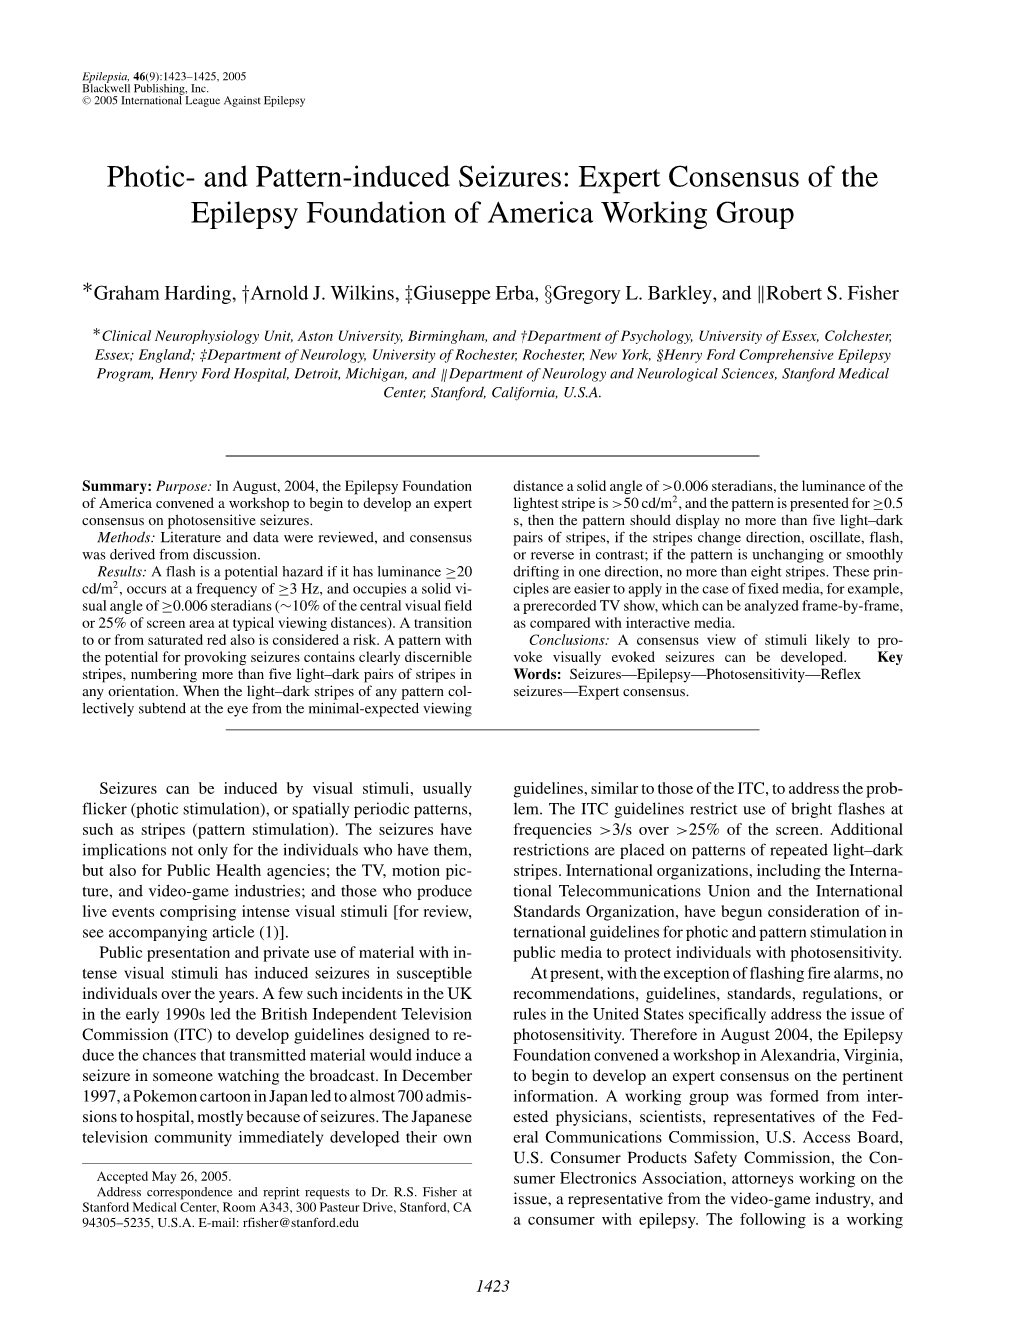 Photic- and Pattern-Induced Seizures: Expert Consensus of the Epilepsy Foundation of America Working Group